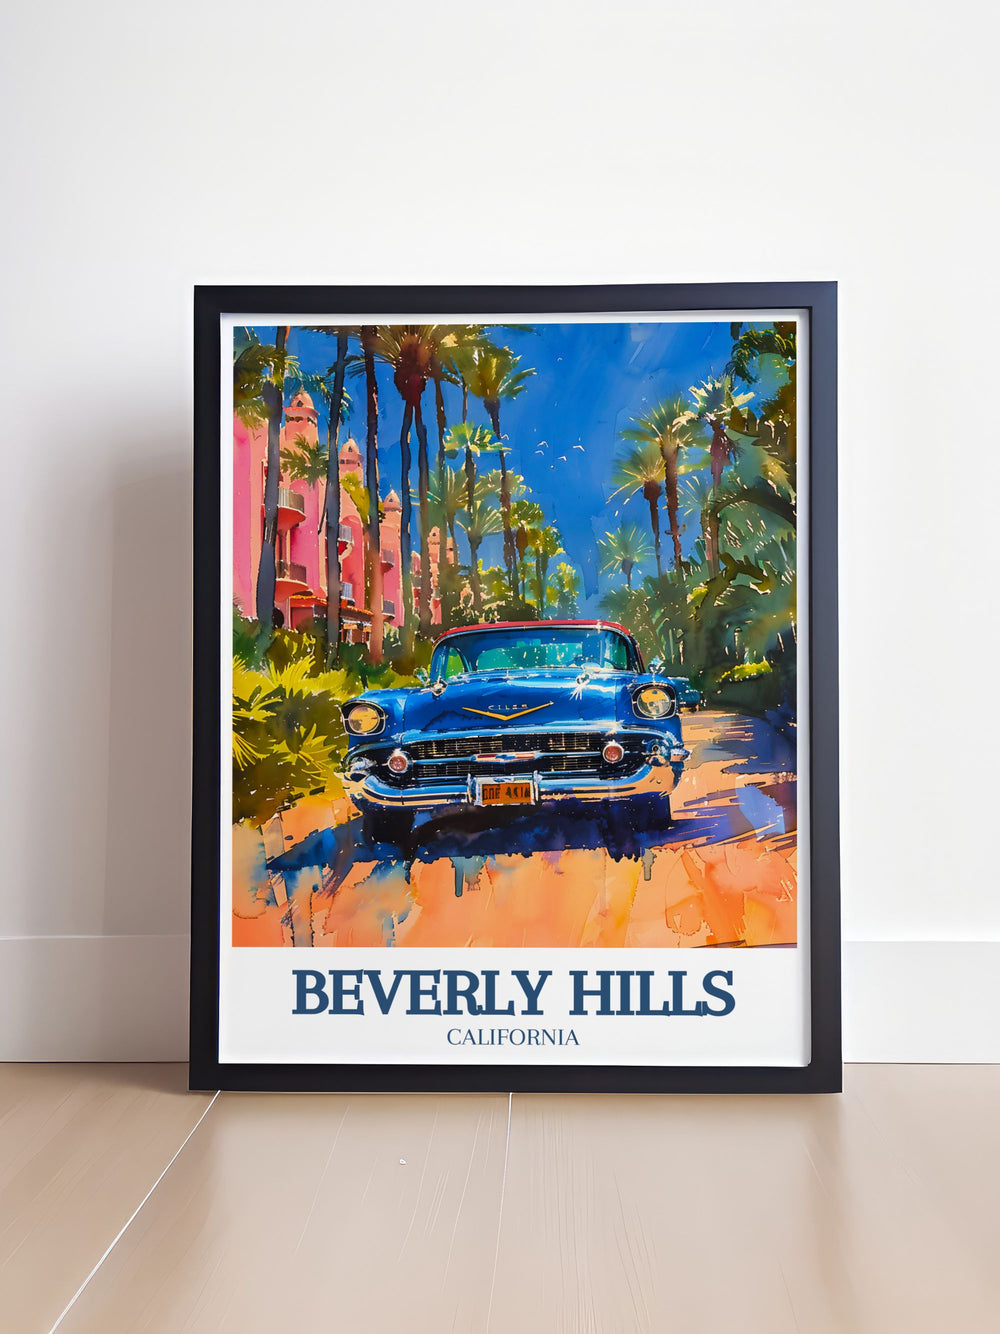 Beautiful California print highlighting the stunning Beverly Hills Hotel and the vibrant Hollywood area, ideal for those who appreciate glamour and elegance. Adds a scenic and stylish touch to your home decor.